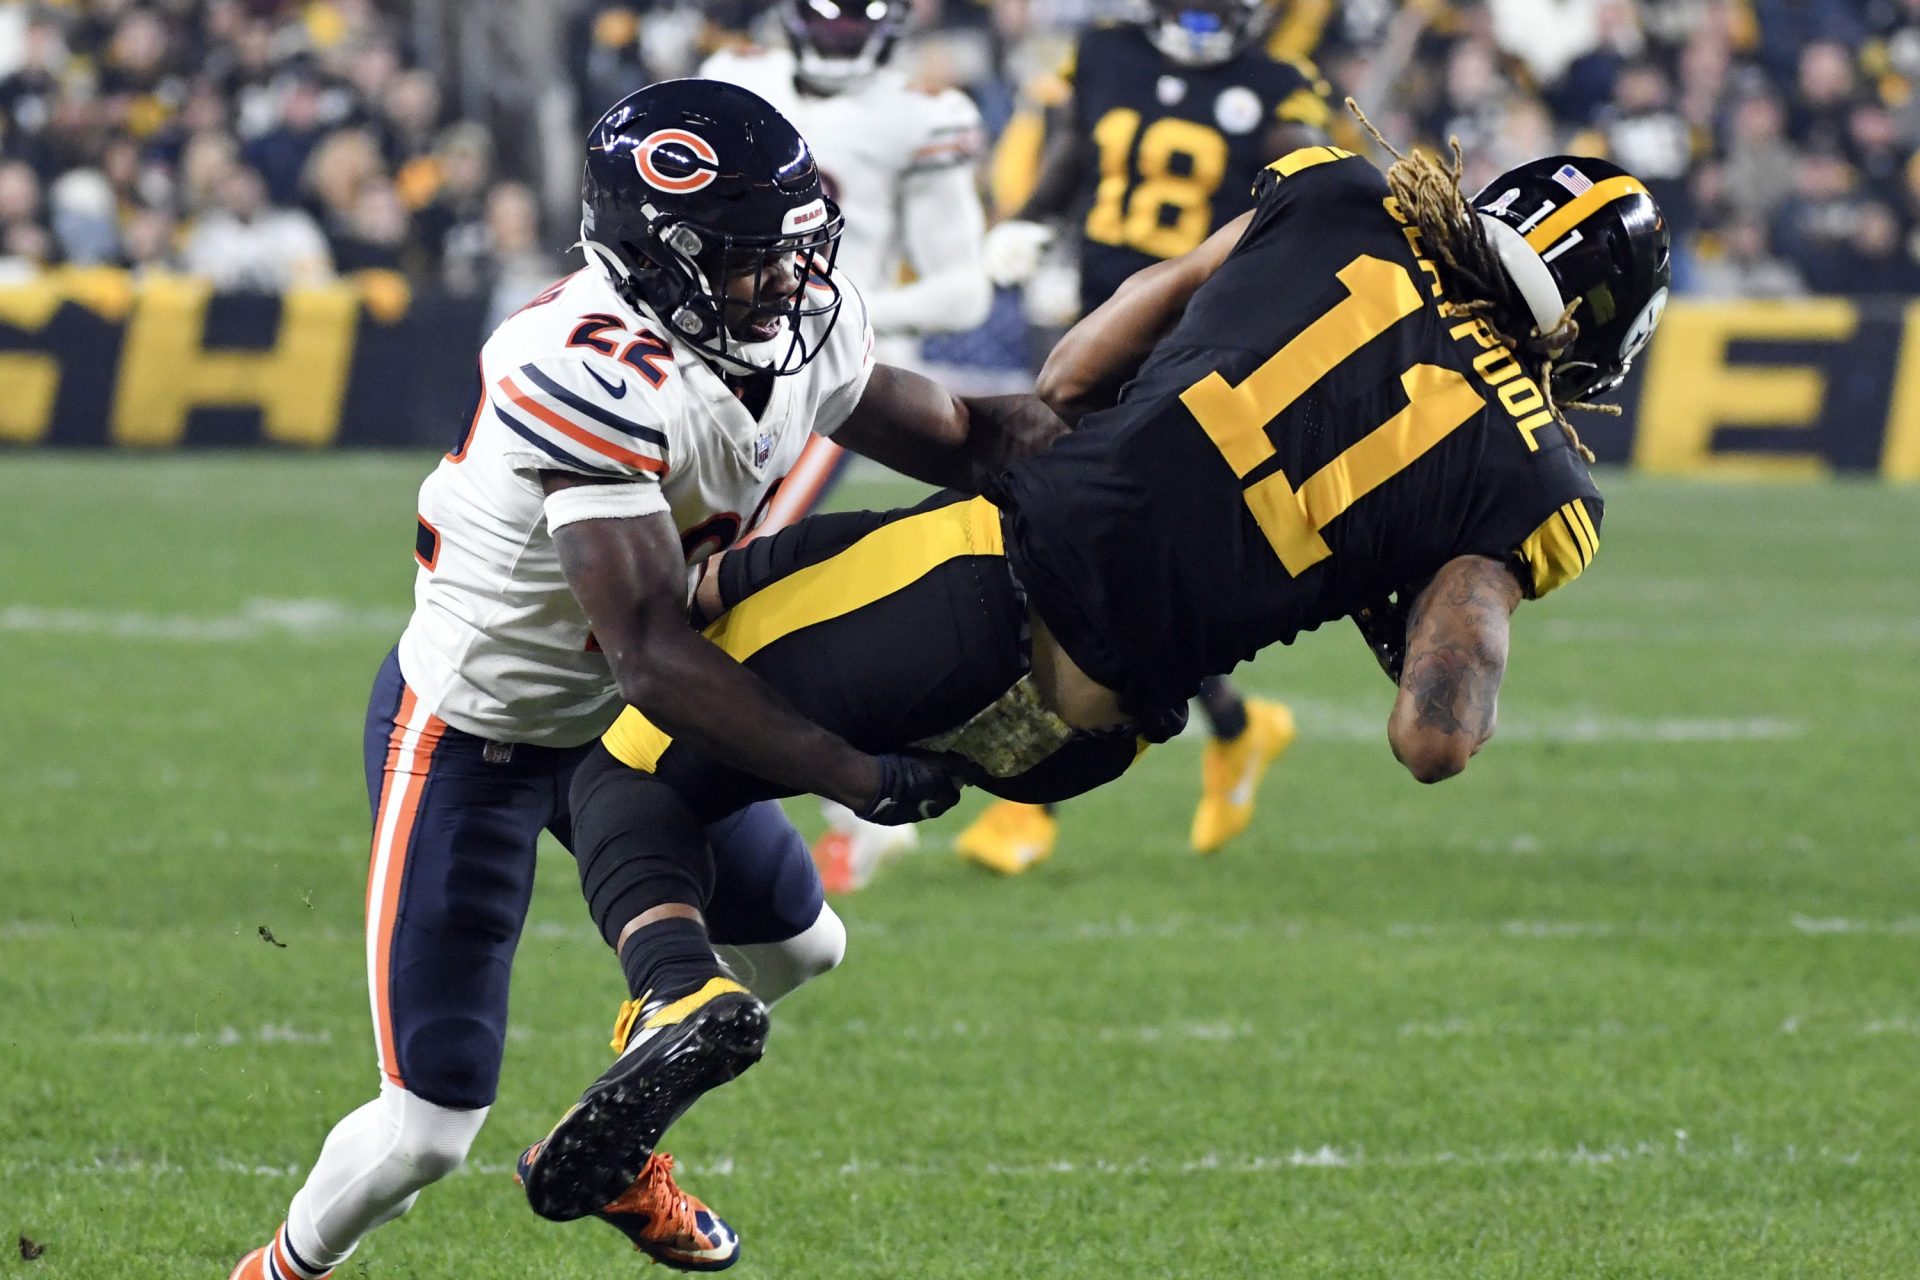 Pittsburgh Steelers wide receiver Chase Claypool (11) is tackled by Chicago Bears cornerback Kindle Vildor (22) after making a catch during the first half an NFL football game, Monday, Nov. 8, 2021, in Pittsburgh.